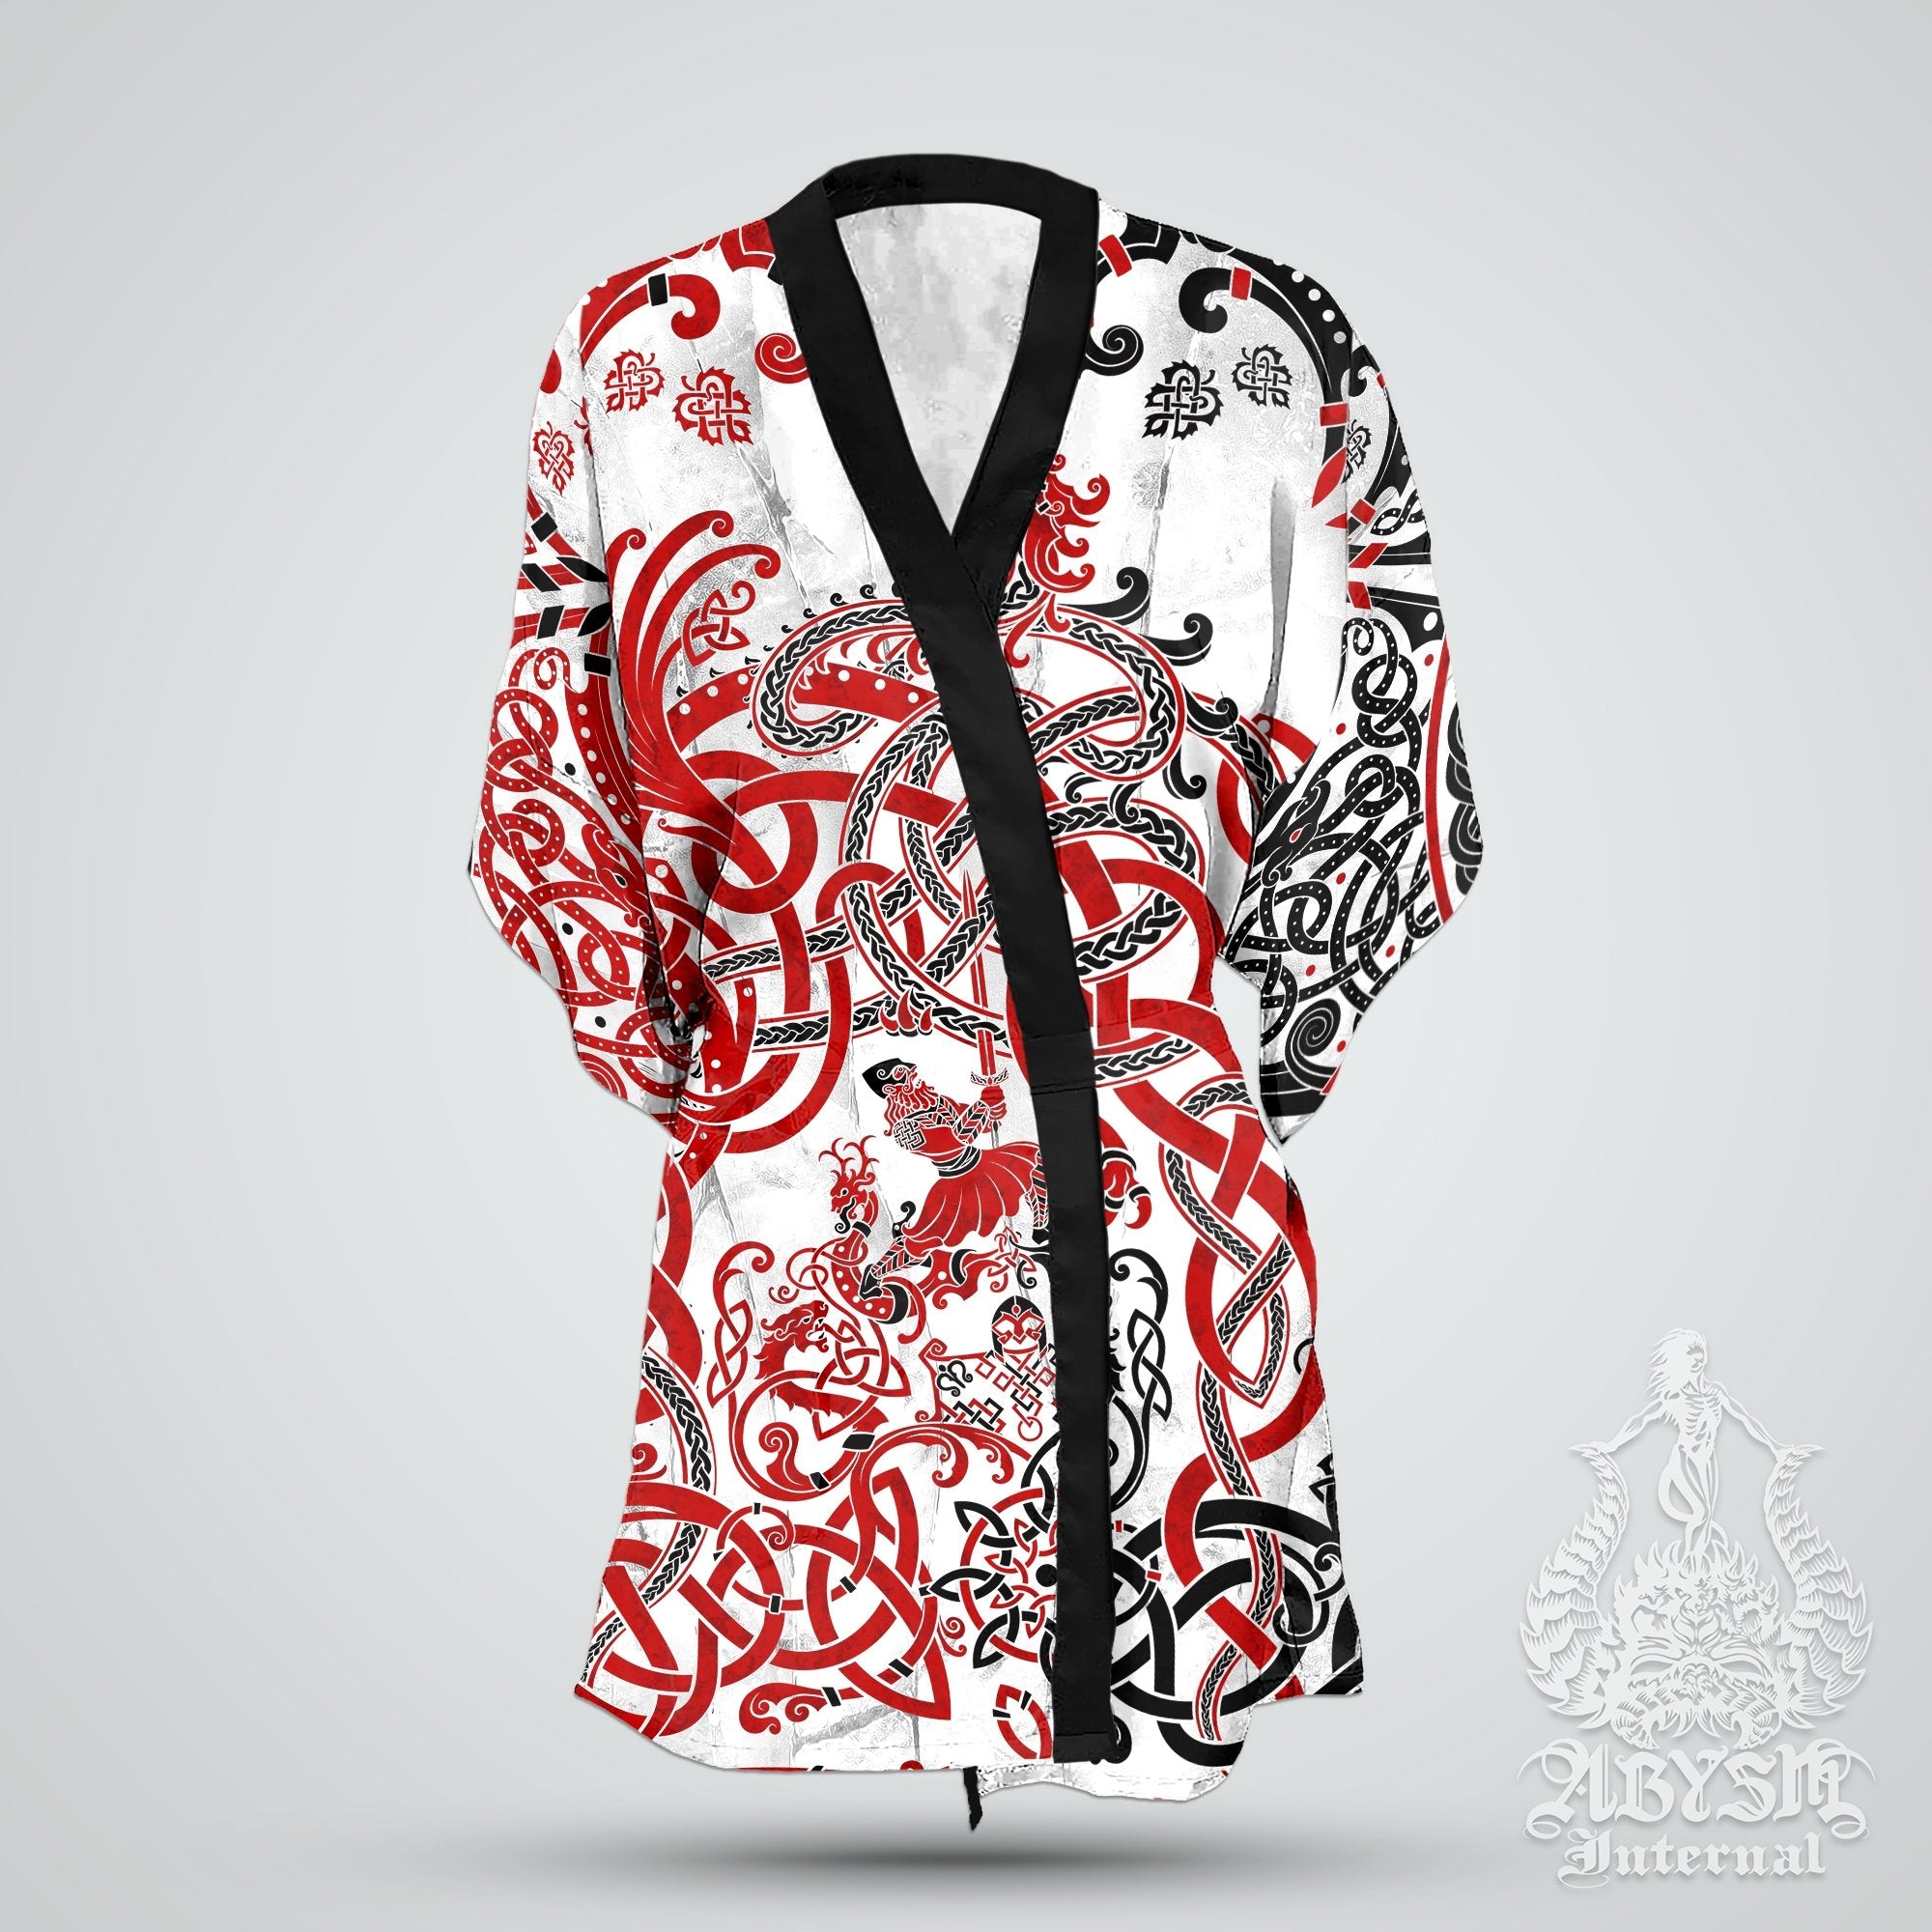 Viking Cover Up, Beach Outfit, Norse Party Kimono, Summer Festival Robe, Indie and Alternative Clothing, Unisex - Dragon Fafnir, Bloody White Goth - Abysm Internal